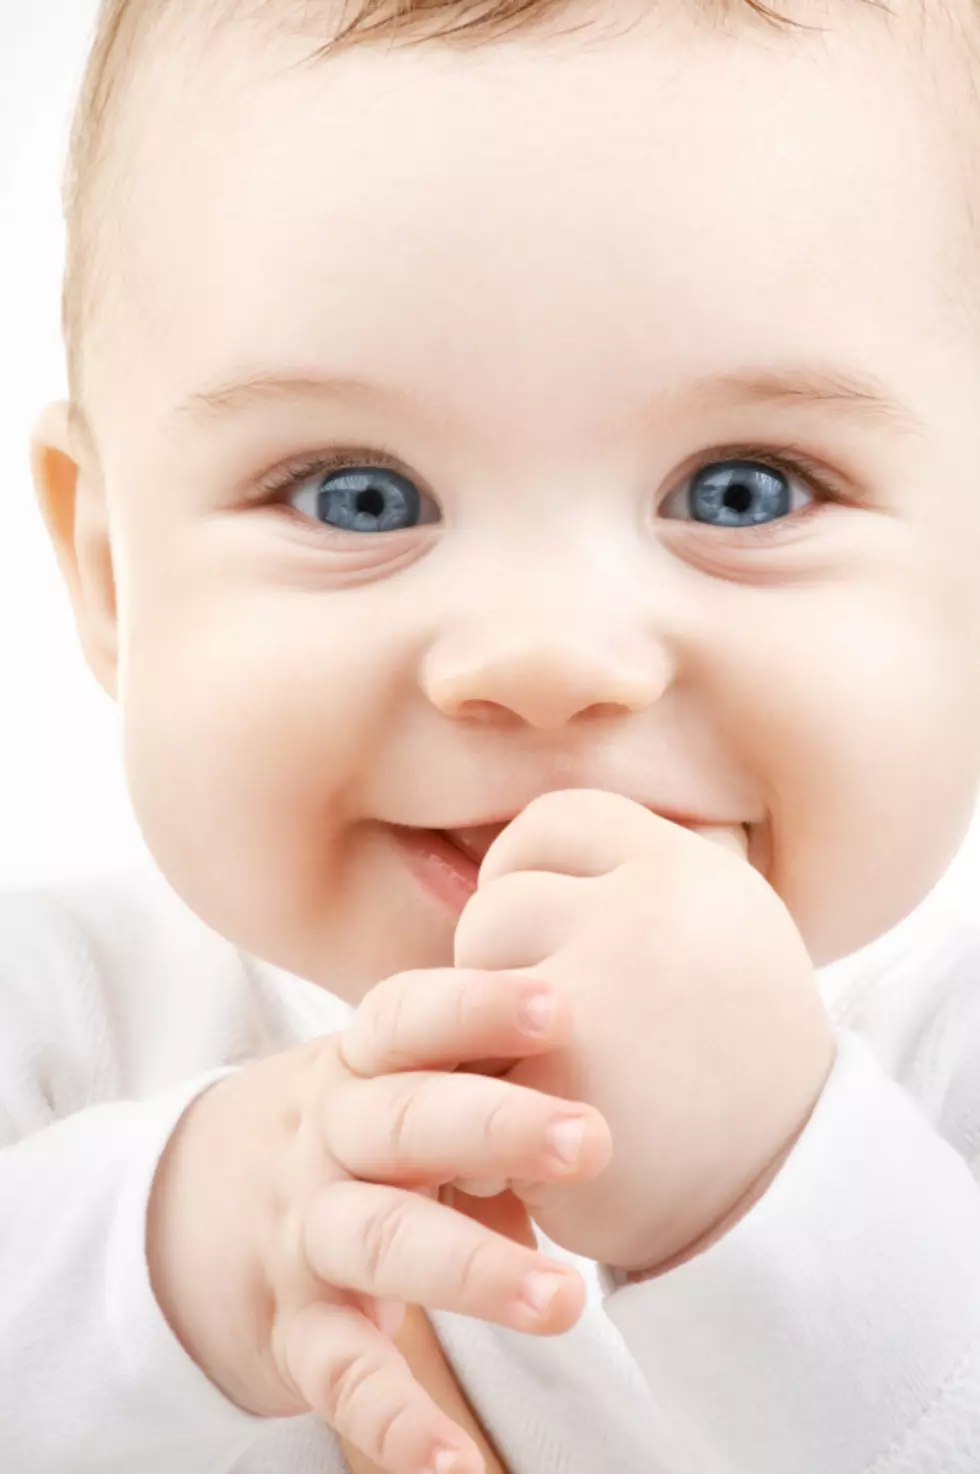 Baby Learns How to Raise His Eyebrows [Video]